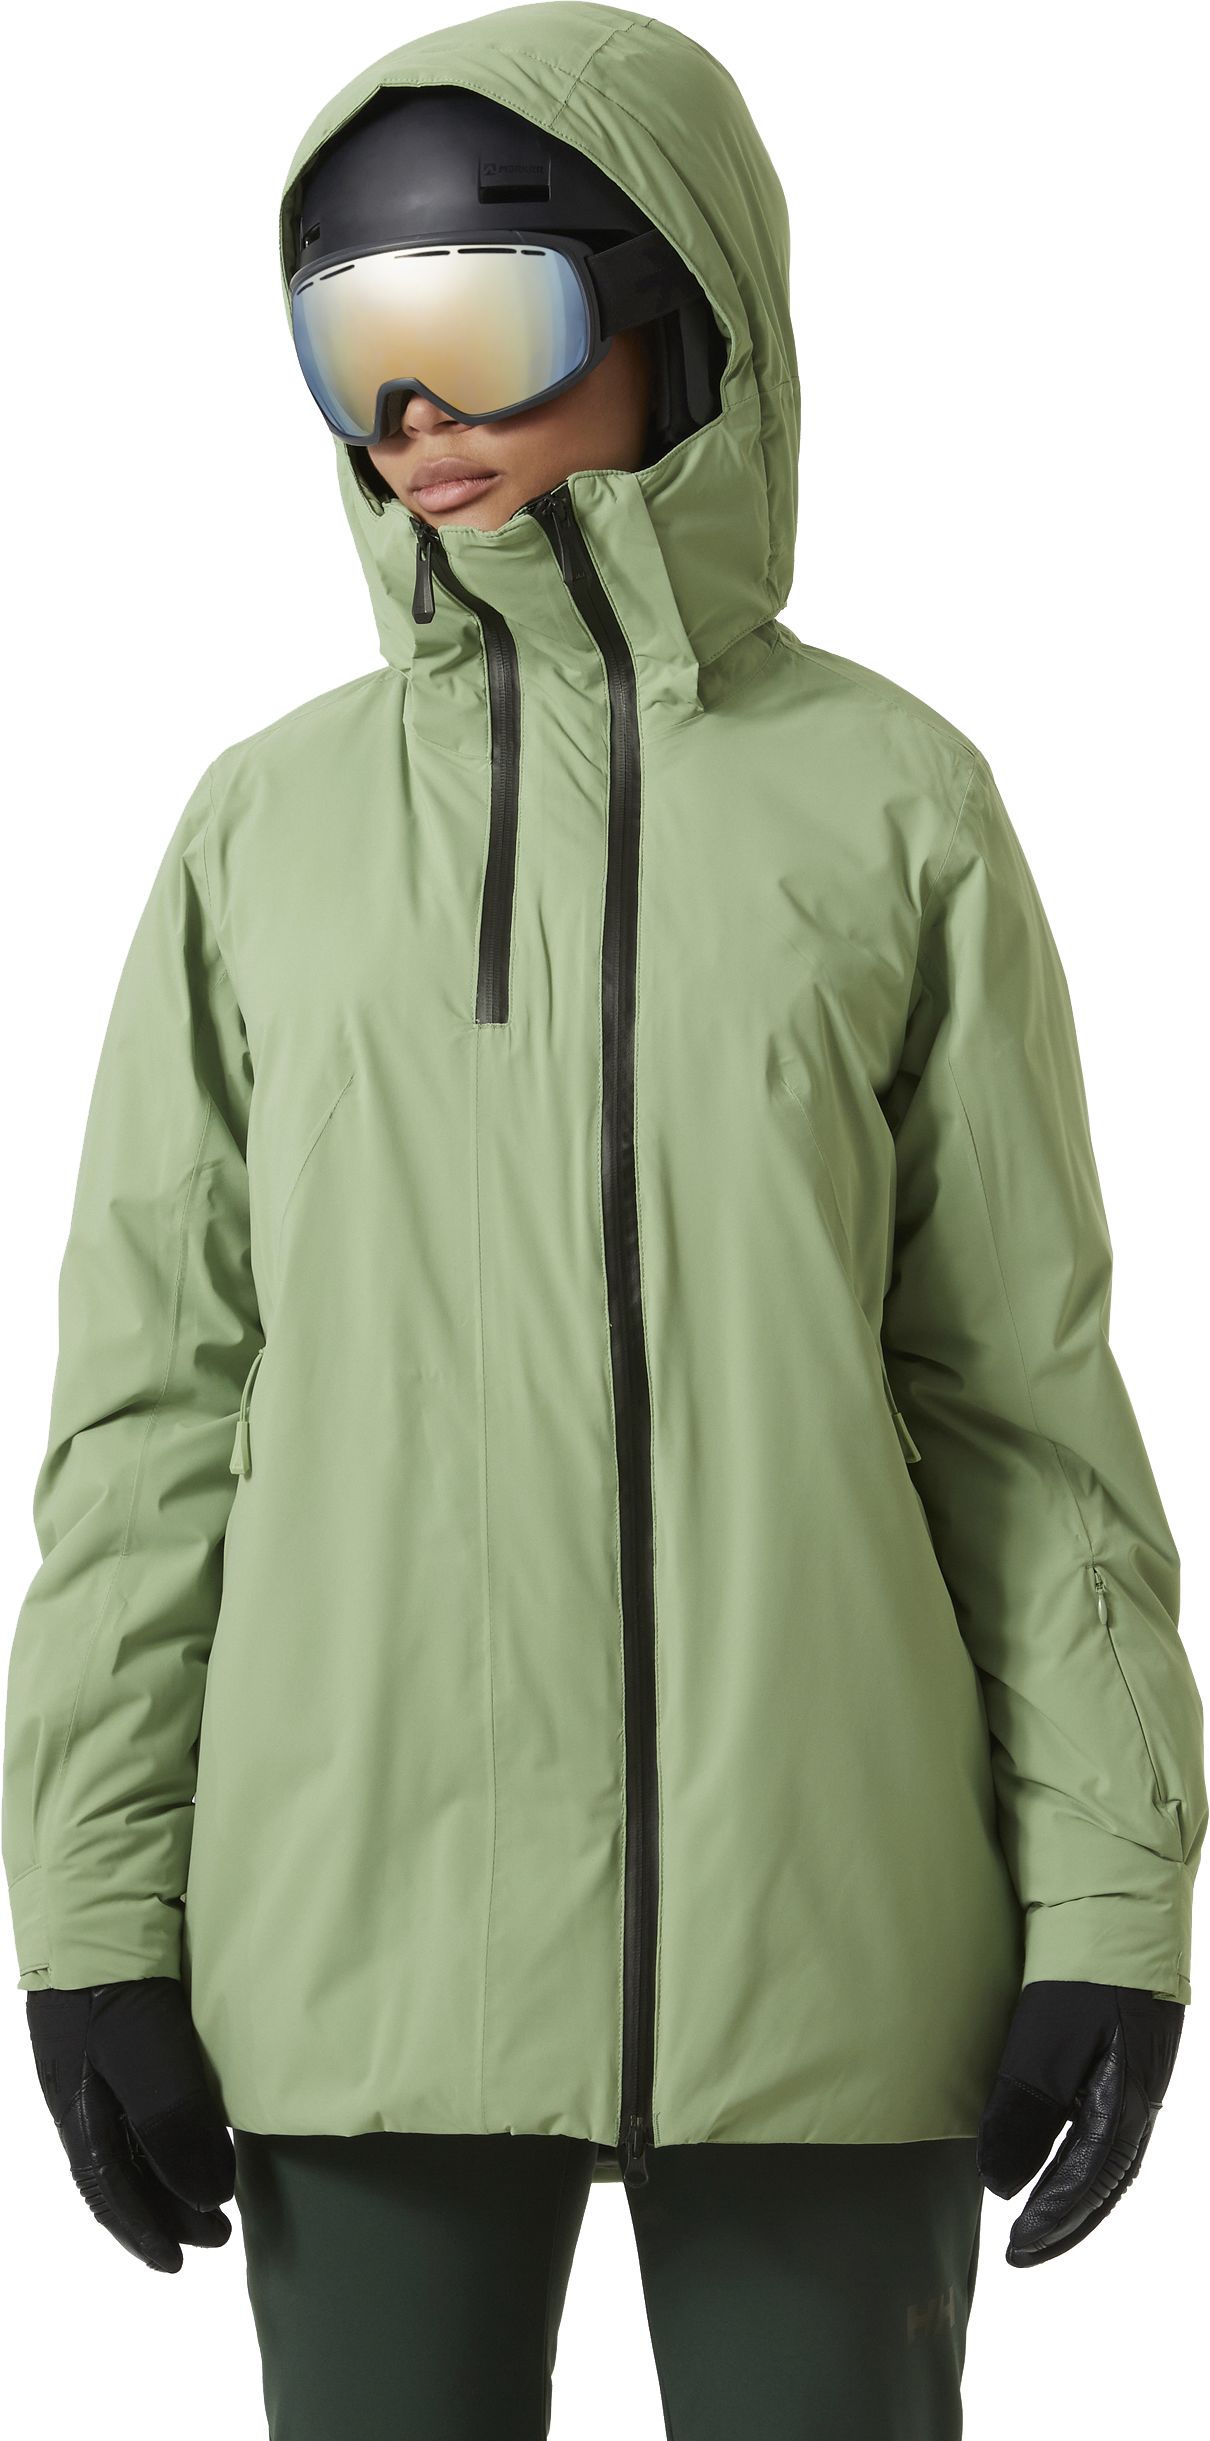 HELLY HANSEN, W NORA LONG INSULATED JACKET